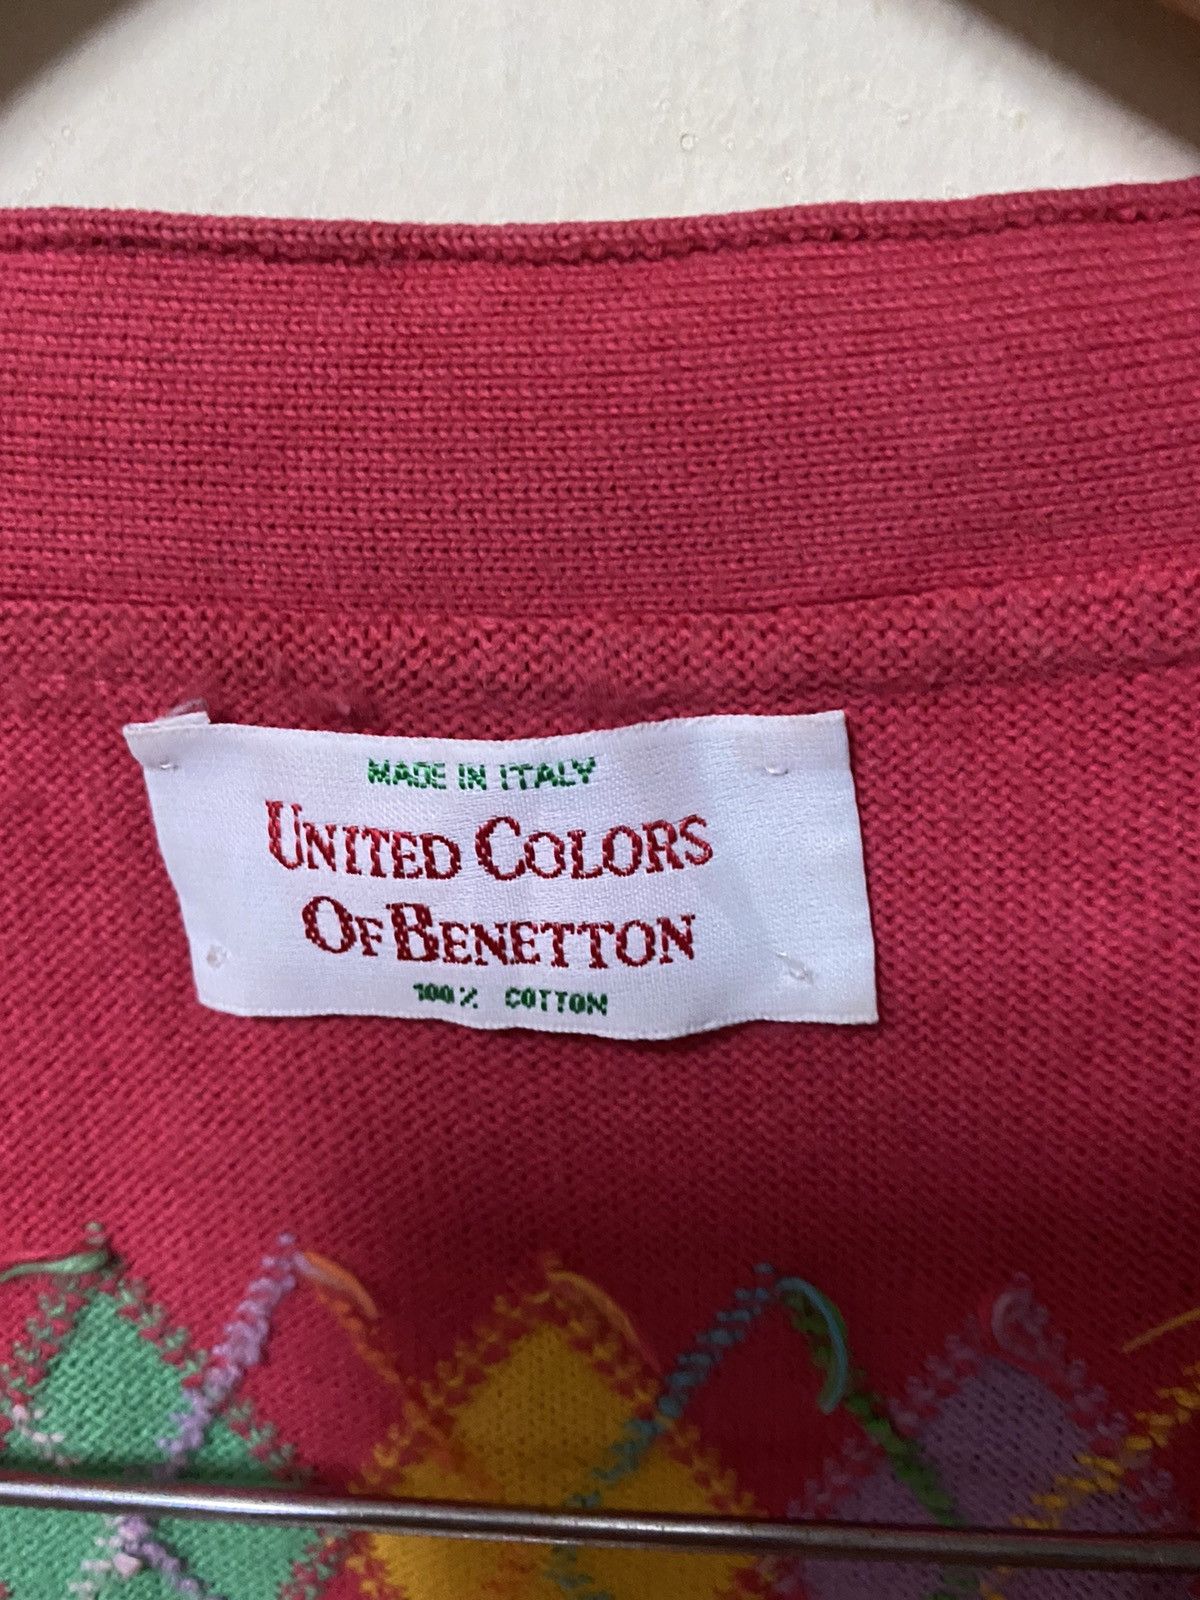 Vintage United Colors of Benetton Multicolor Knit Cardigan - 5